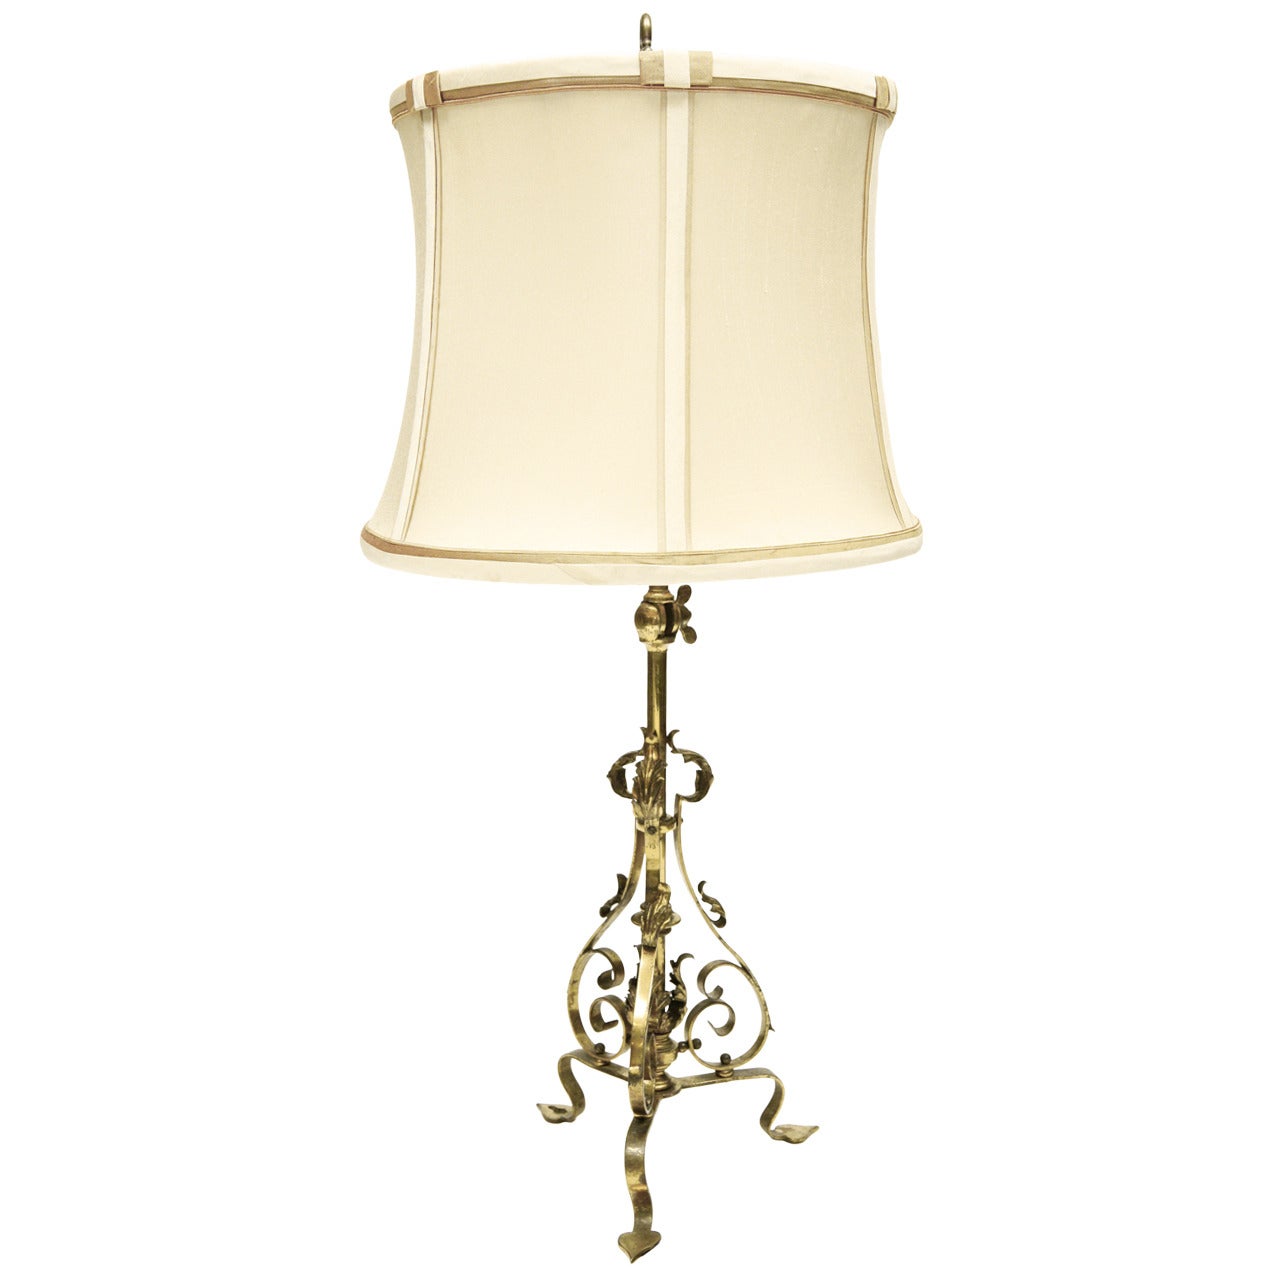 Antique Wall or Table Lamp For Sale